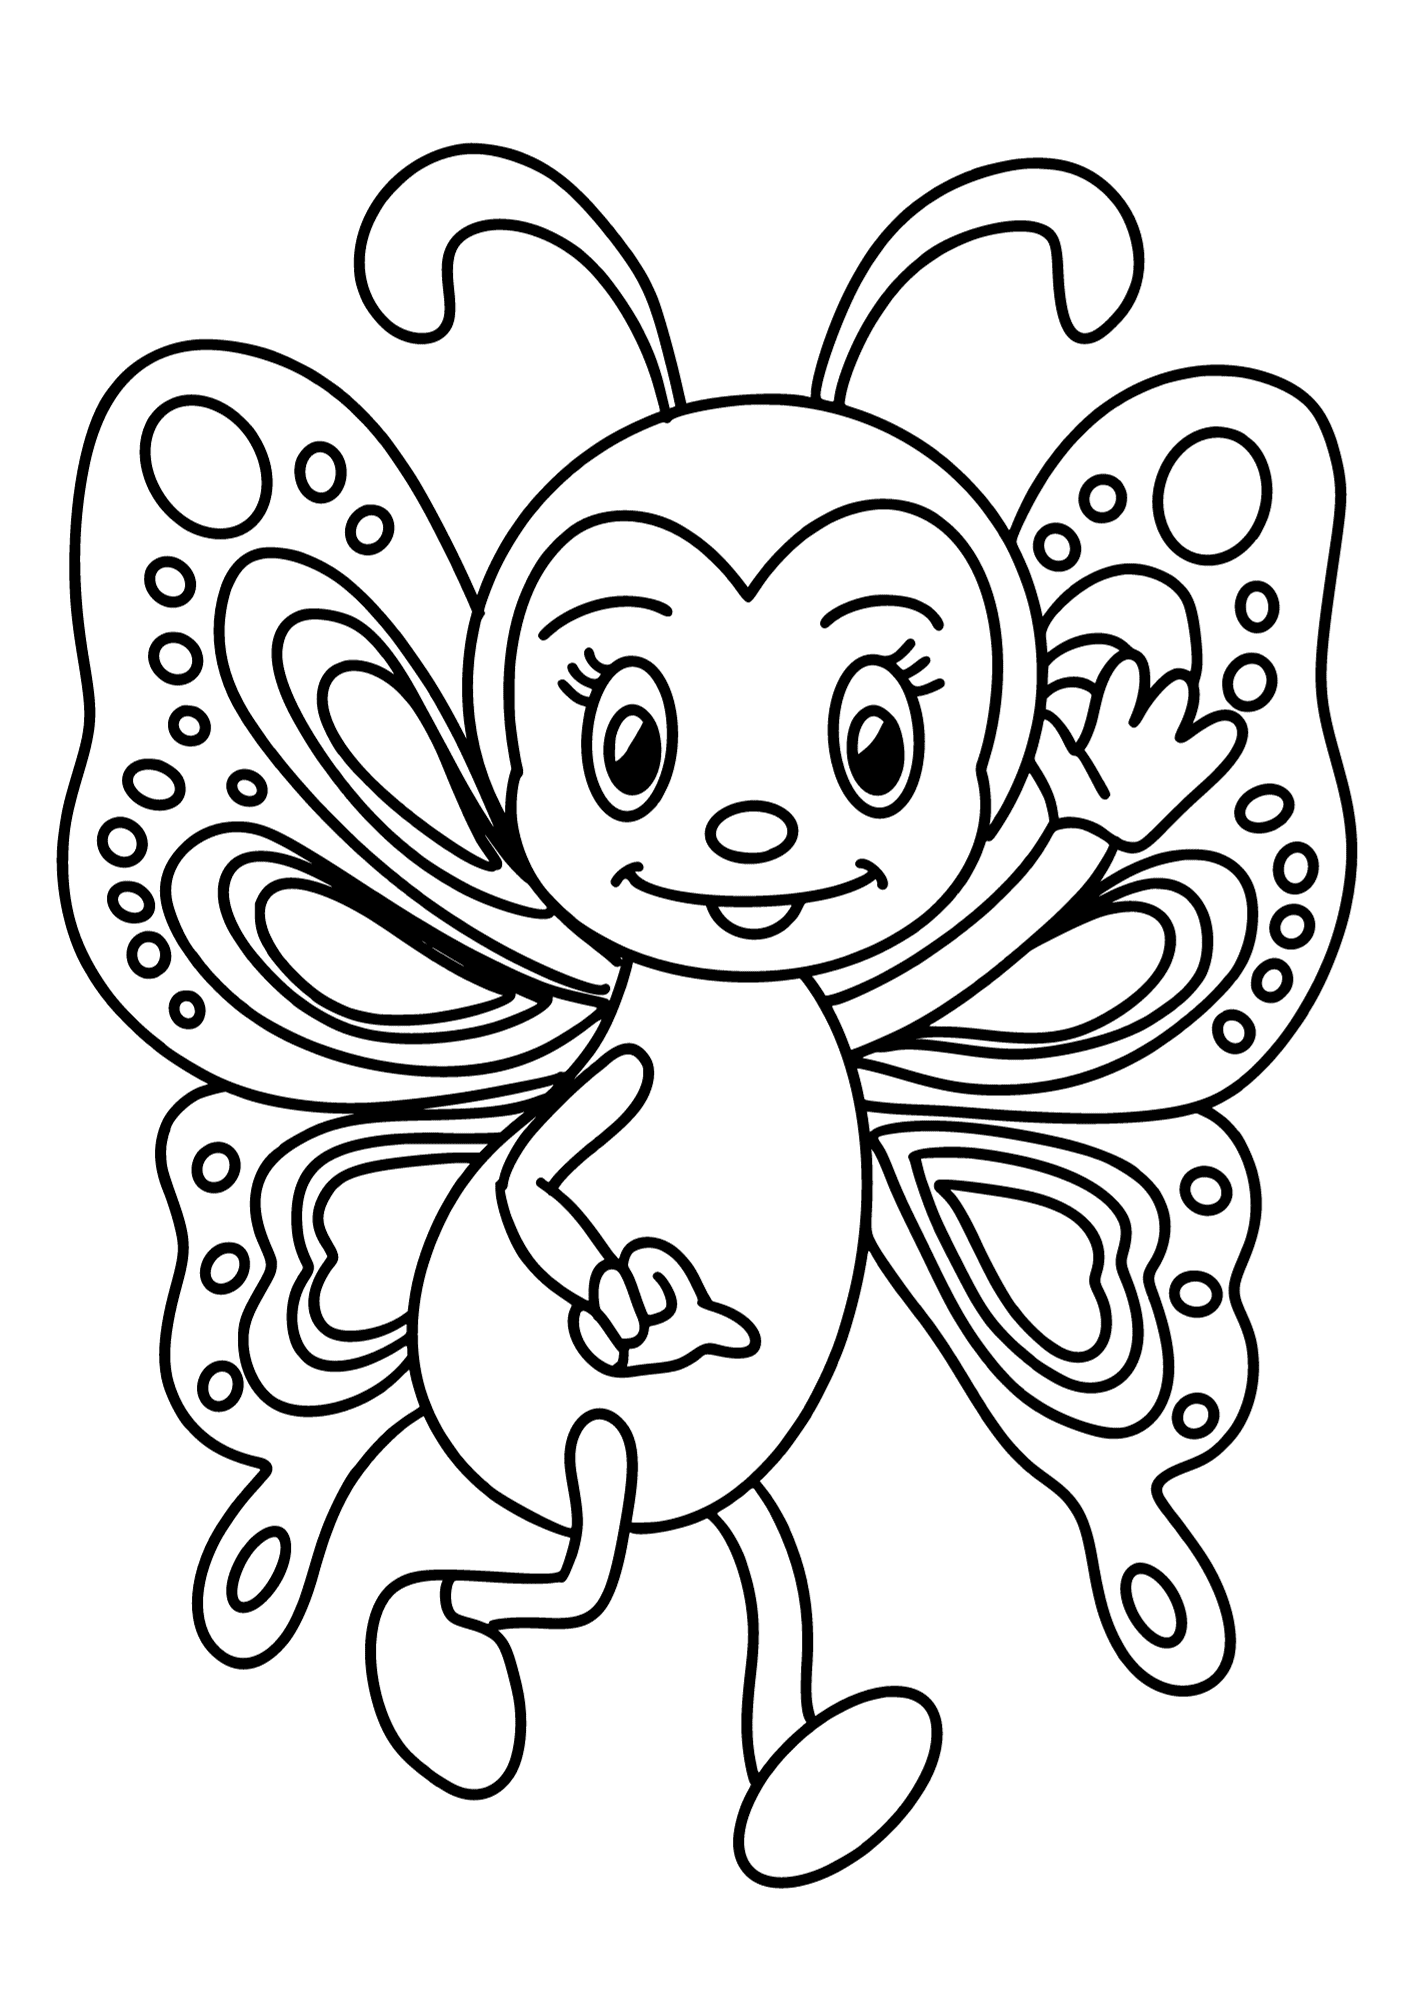 Butterfly Image Coloring Page